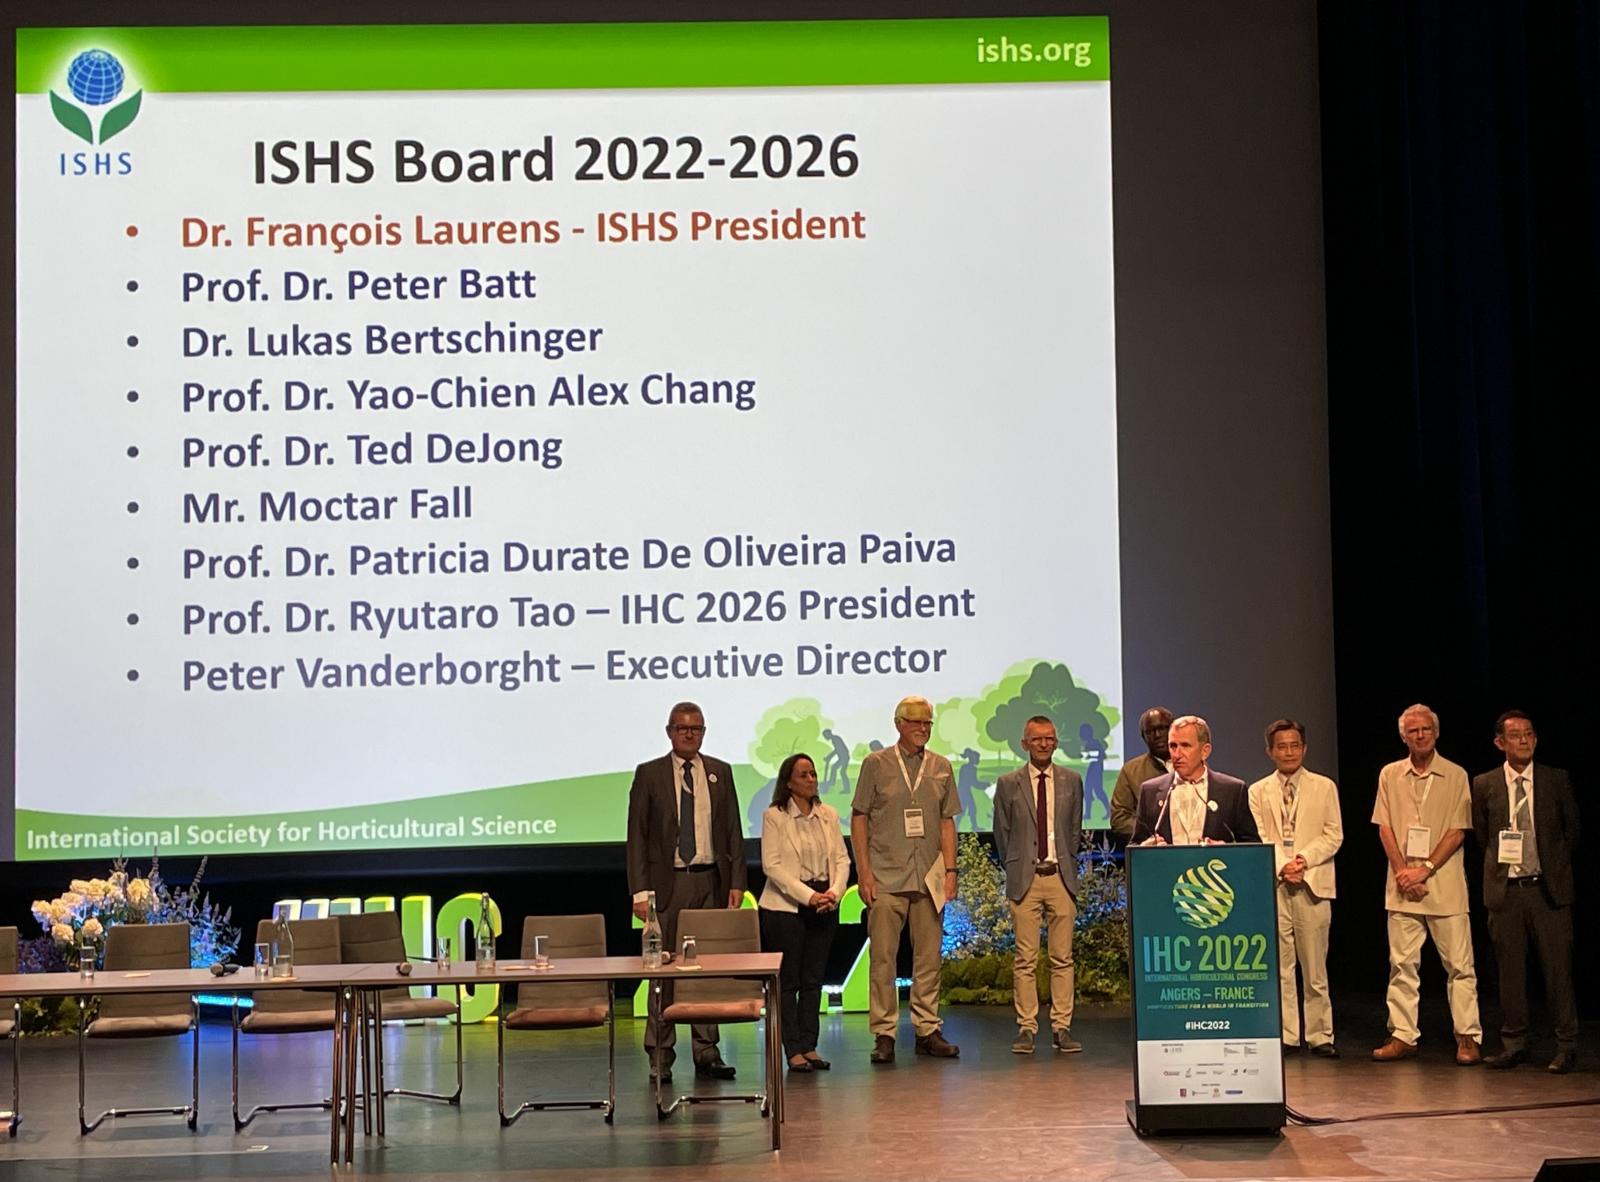 The nine new Board members of the International Society for Horticultural Science: At front and center is the new president, and behind him from left to right are the executive director and representatives of South America, North America, Europe, Africa, Asia (Taiwan, Professor Yao-Chien Alex Chang), Oceania, and Japan (the host of the next International Horticulture Congress).